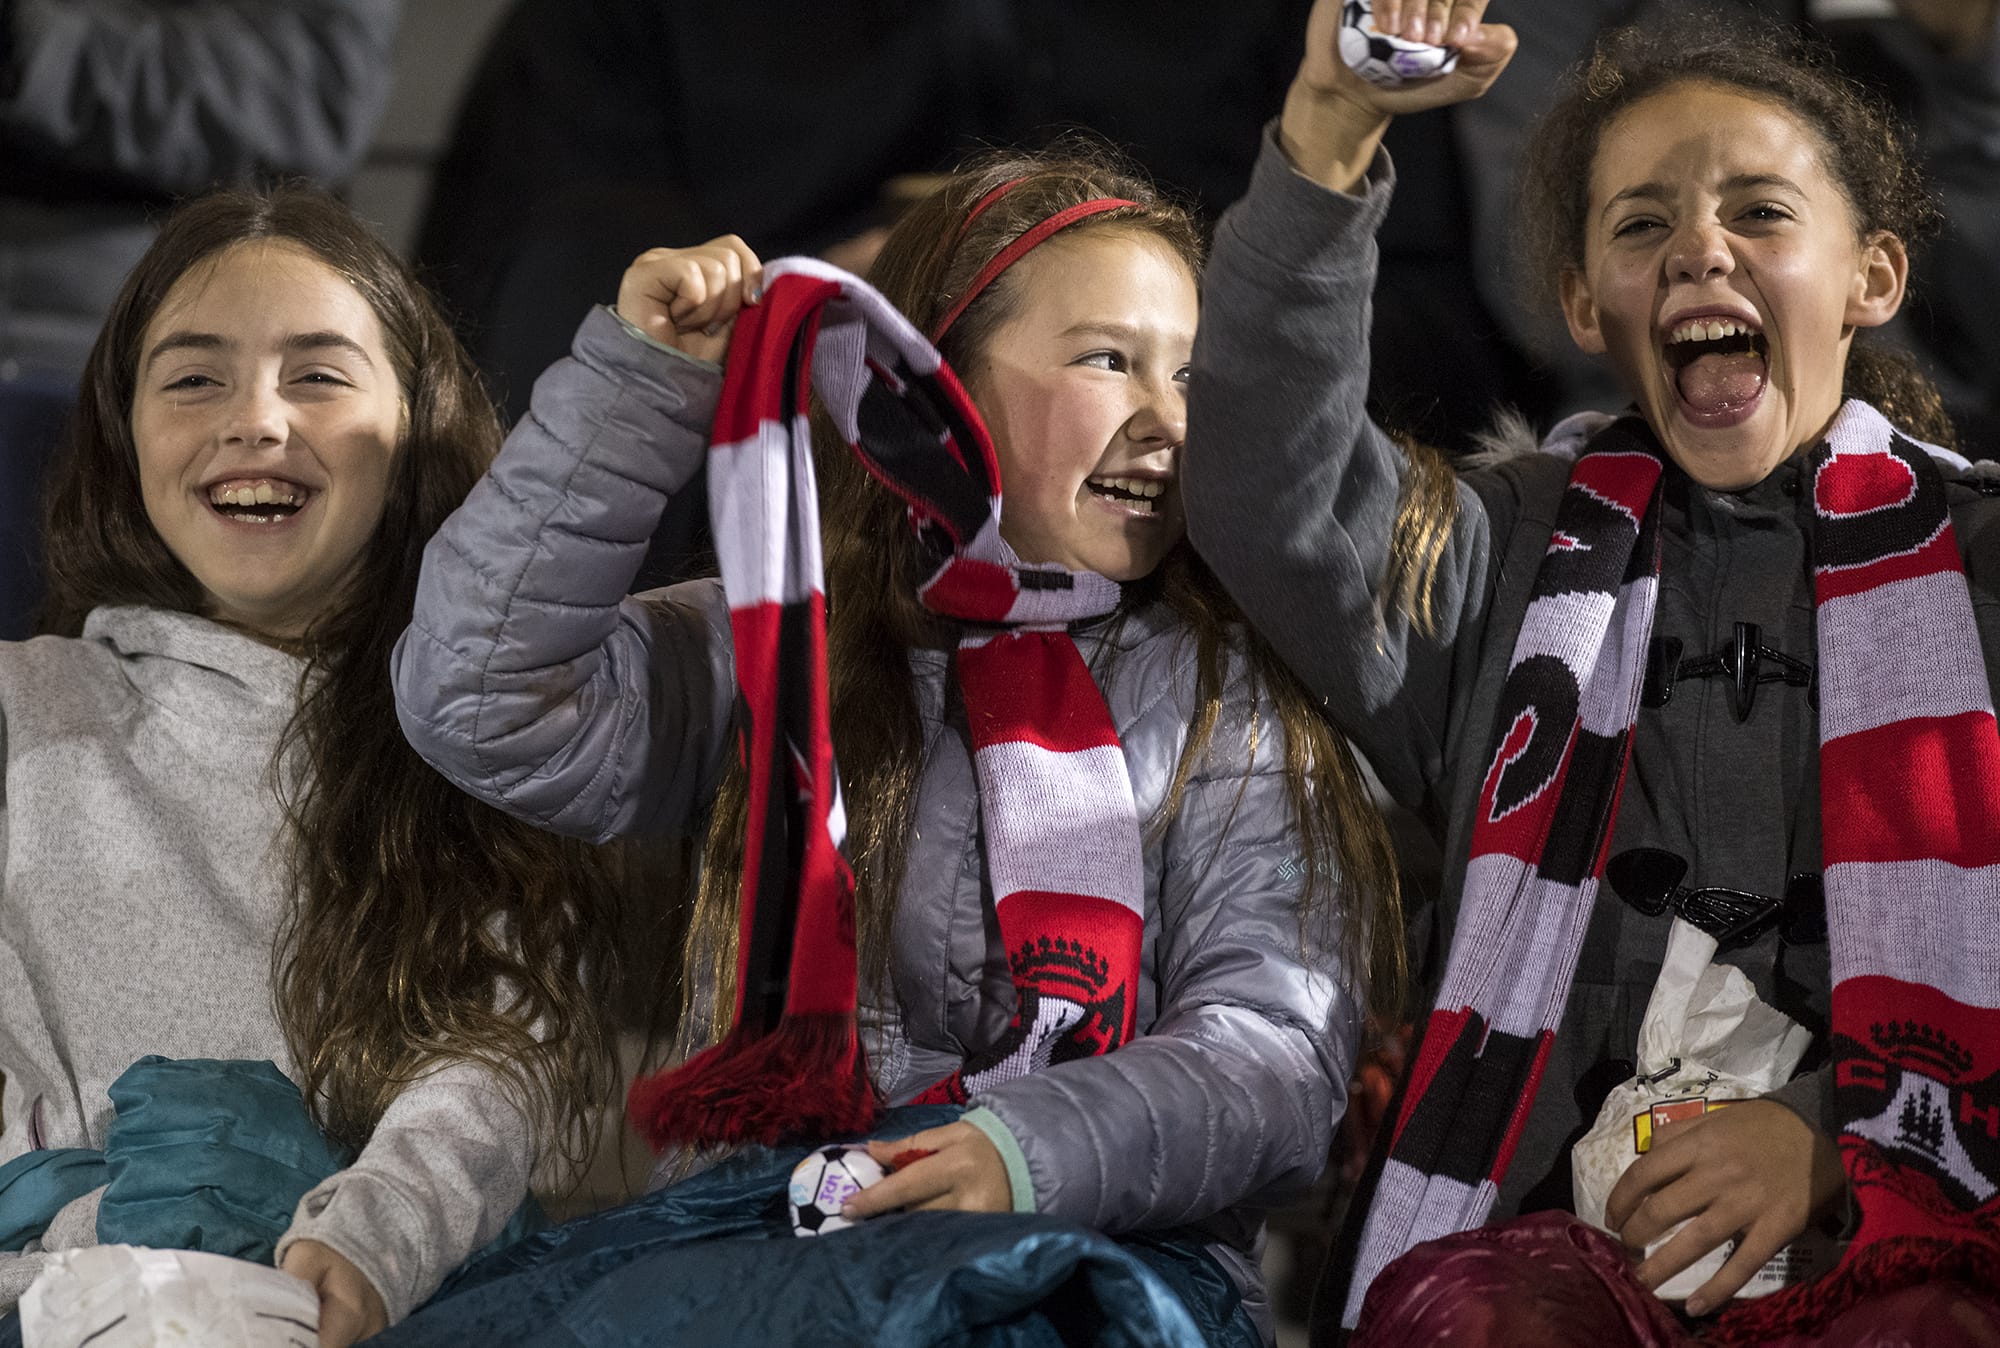 Lila McCarthy, 10, left, Eliana Gibson, 9, center, and Lauren Hood, right, 10, all of Camas, cheer on the Papermakers during the first round of the 4A state playoffs at Doc Harris Stadium in Camas on Wednesday, Nov. 7, 2018. Camas won 1-0.